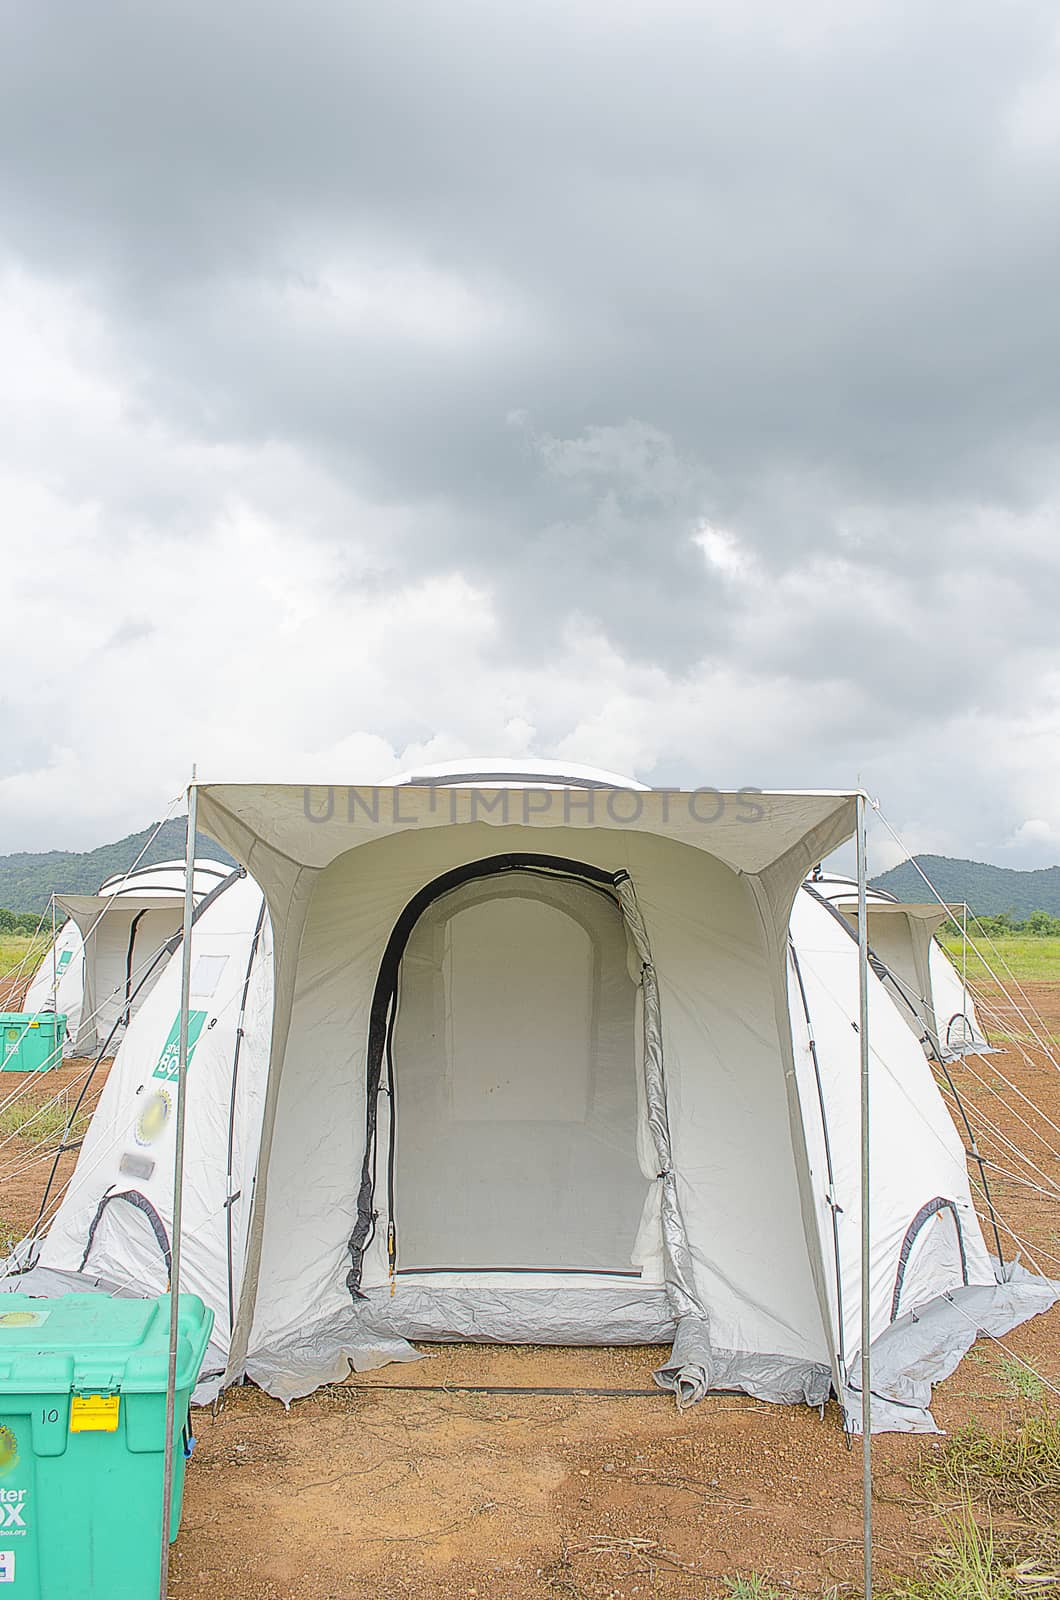 Shelter Tent for Refuging from Natural Disaster by kobfujar